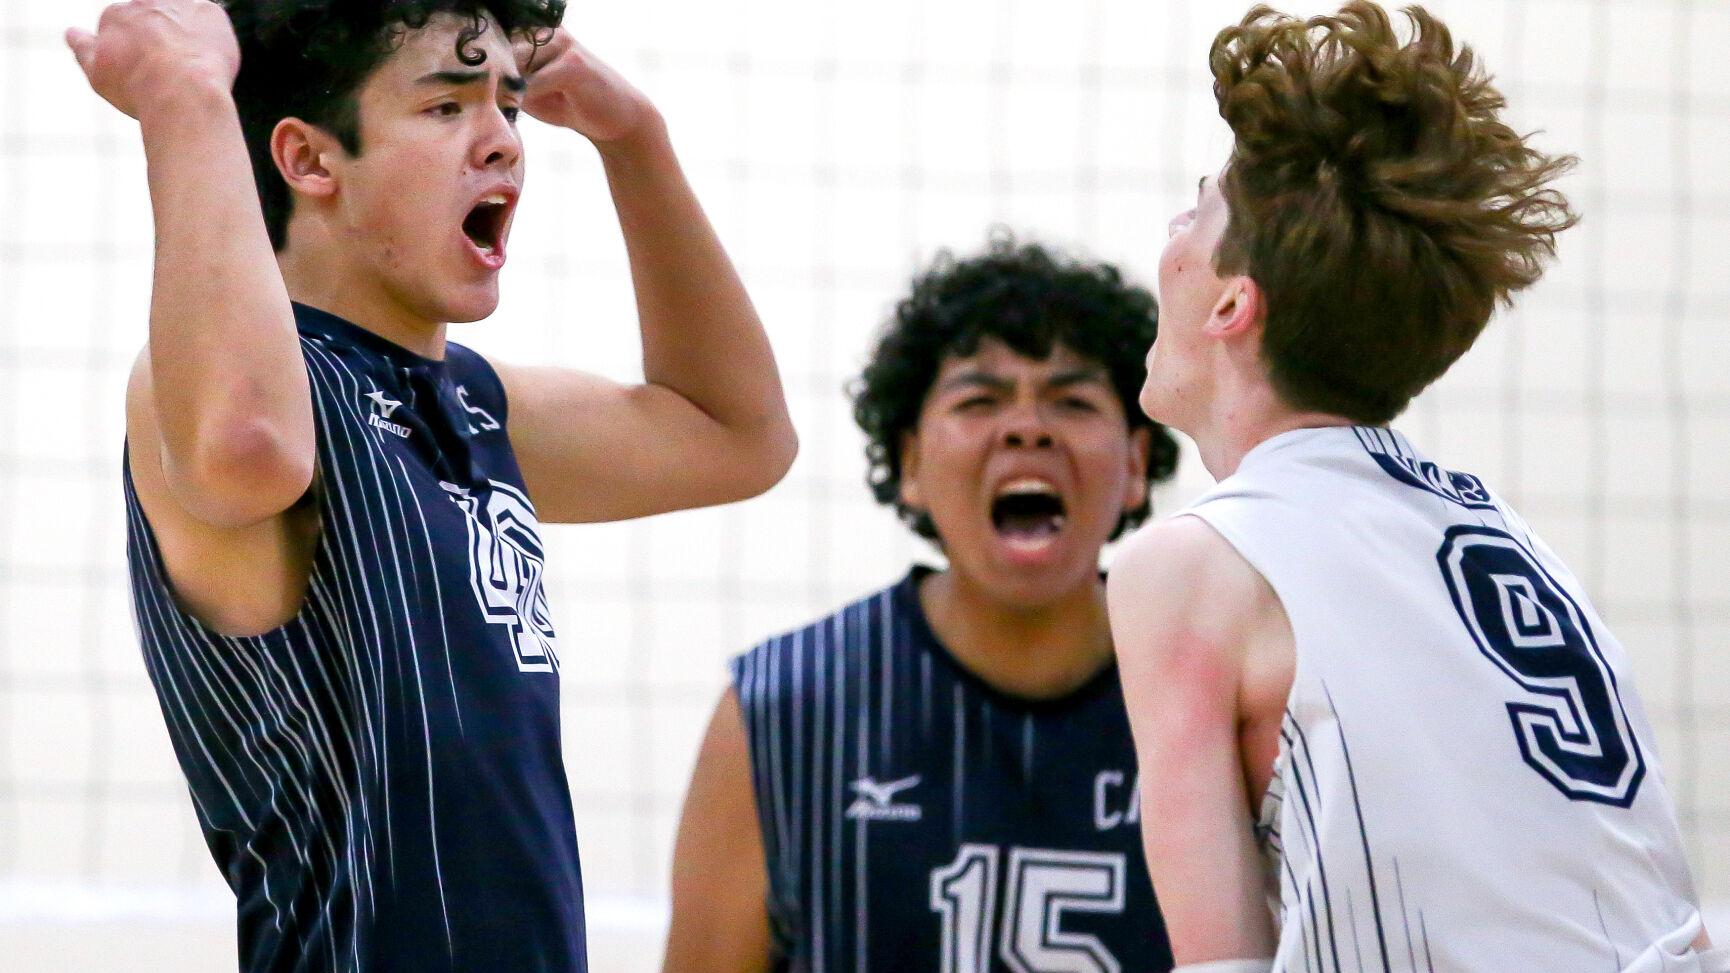 Photos: Cienega advances in volleyball playoffs after win over Catalina Foothills